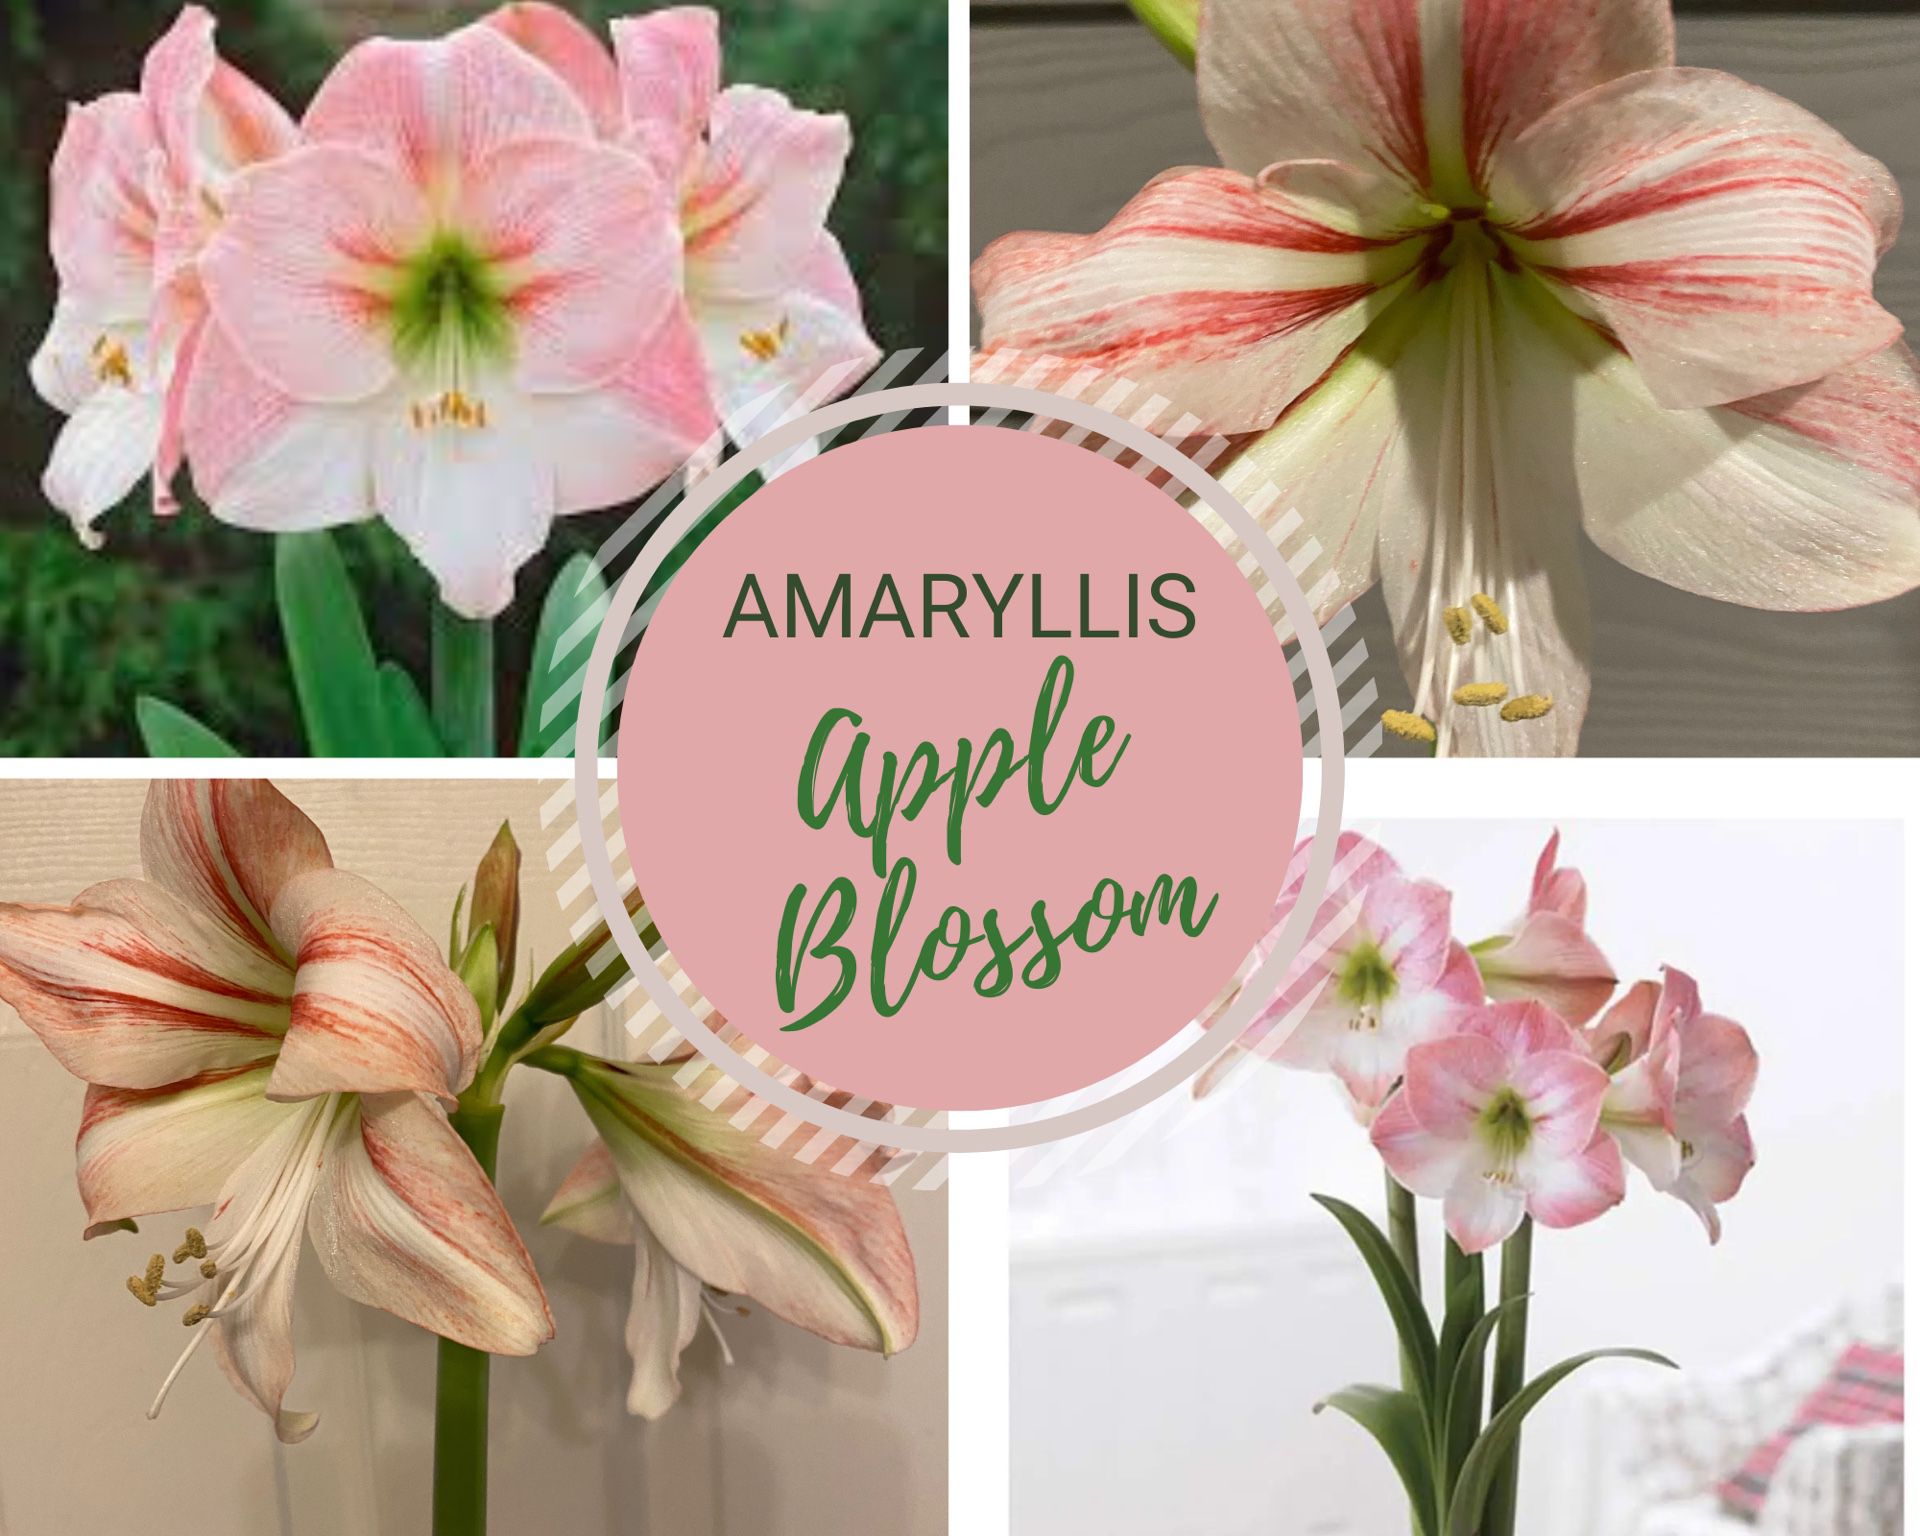 AMARYLLIS “Apple Blossom” | 3 Different Types Available | Ready To Bloom | Send A Direct Message To Customize Your Choice